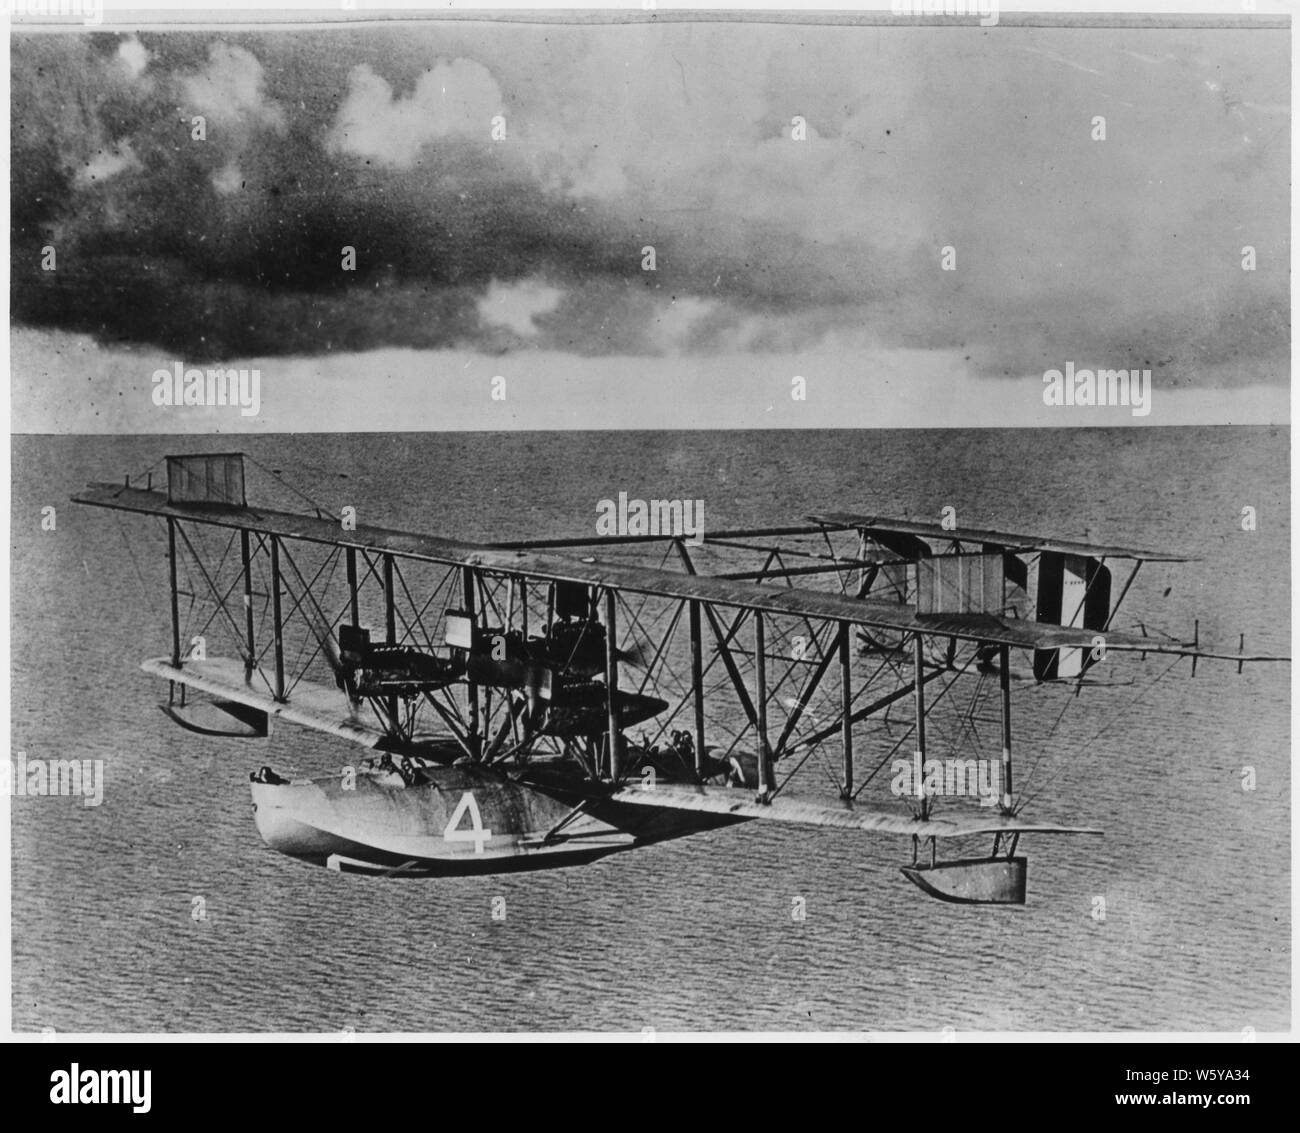 The first aircraft to fly the Atlantic. There were three of these NC-4's which started across the Atlantic in May 1919 for Europe but only the NC-4 piloted by LCDR. A. C. Read completed the crossing. The flight began at Trepassey, New Foundland on May 16, 1919 and after 17 hours the NC-4 arrived at Horta, Azores. Ten days later it completed the flight arriving at Plymouth, England on May 26, 1919. Stock Photo